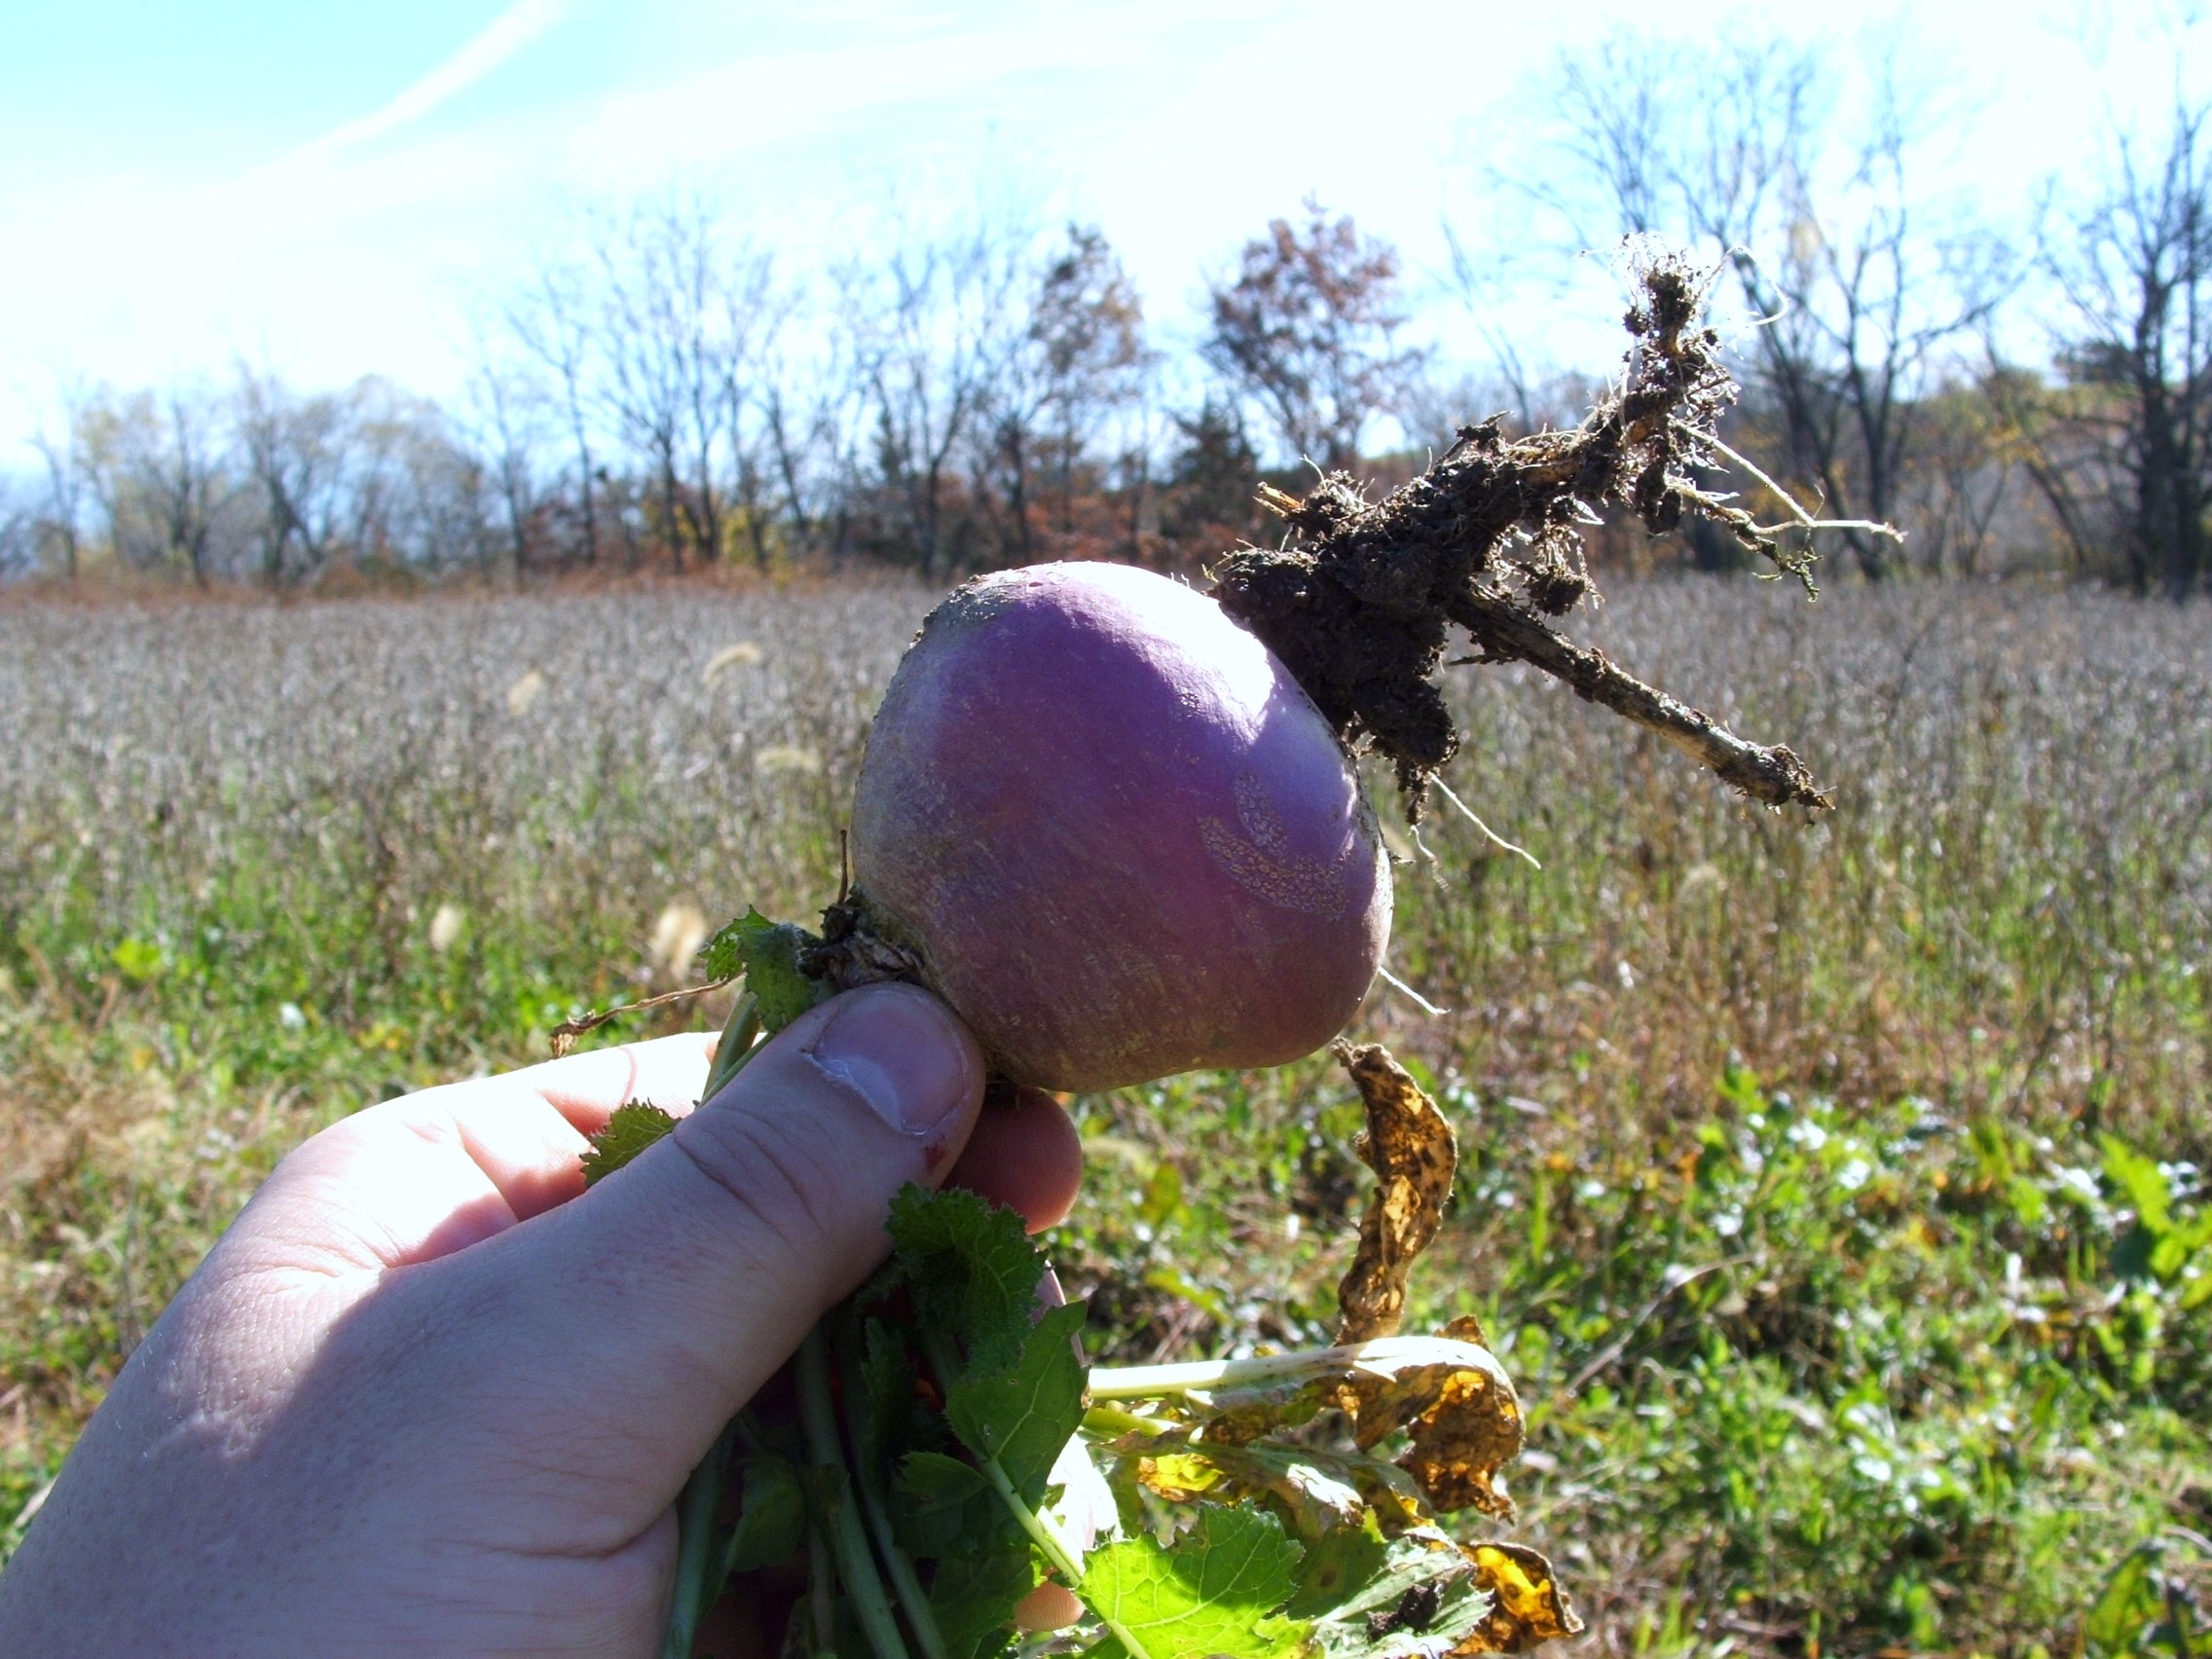 This purple top turnip was the result of a July over-seeding in soybeans. Moisture and nitrogen are keys to making it work.